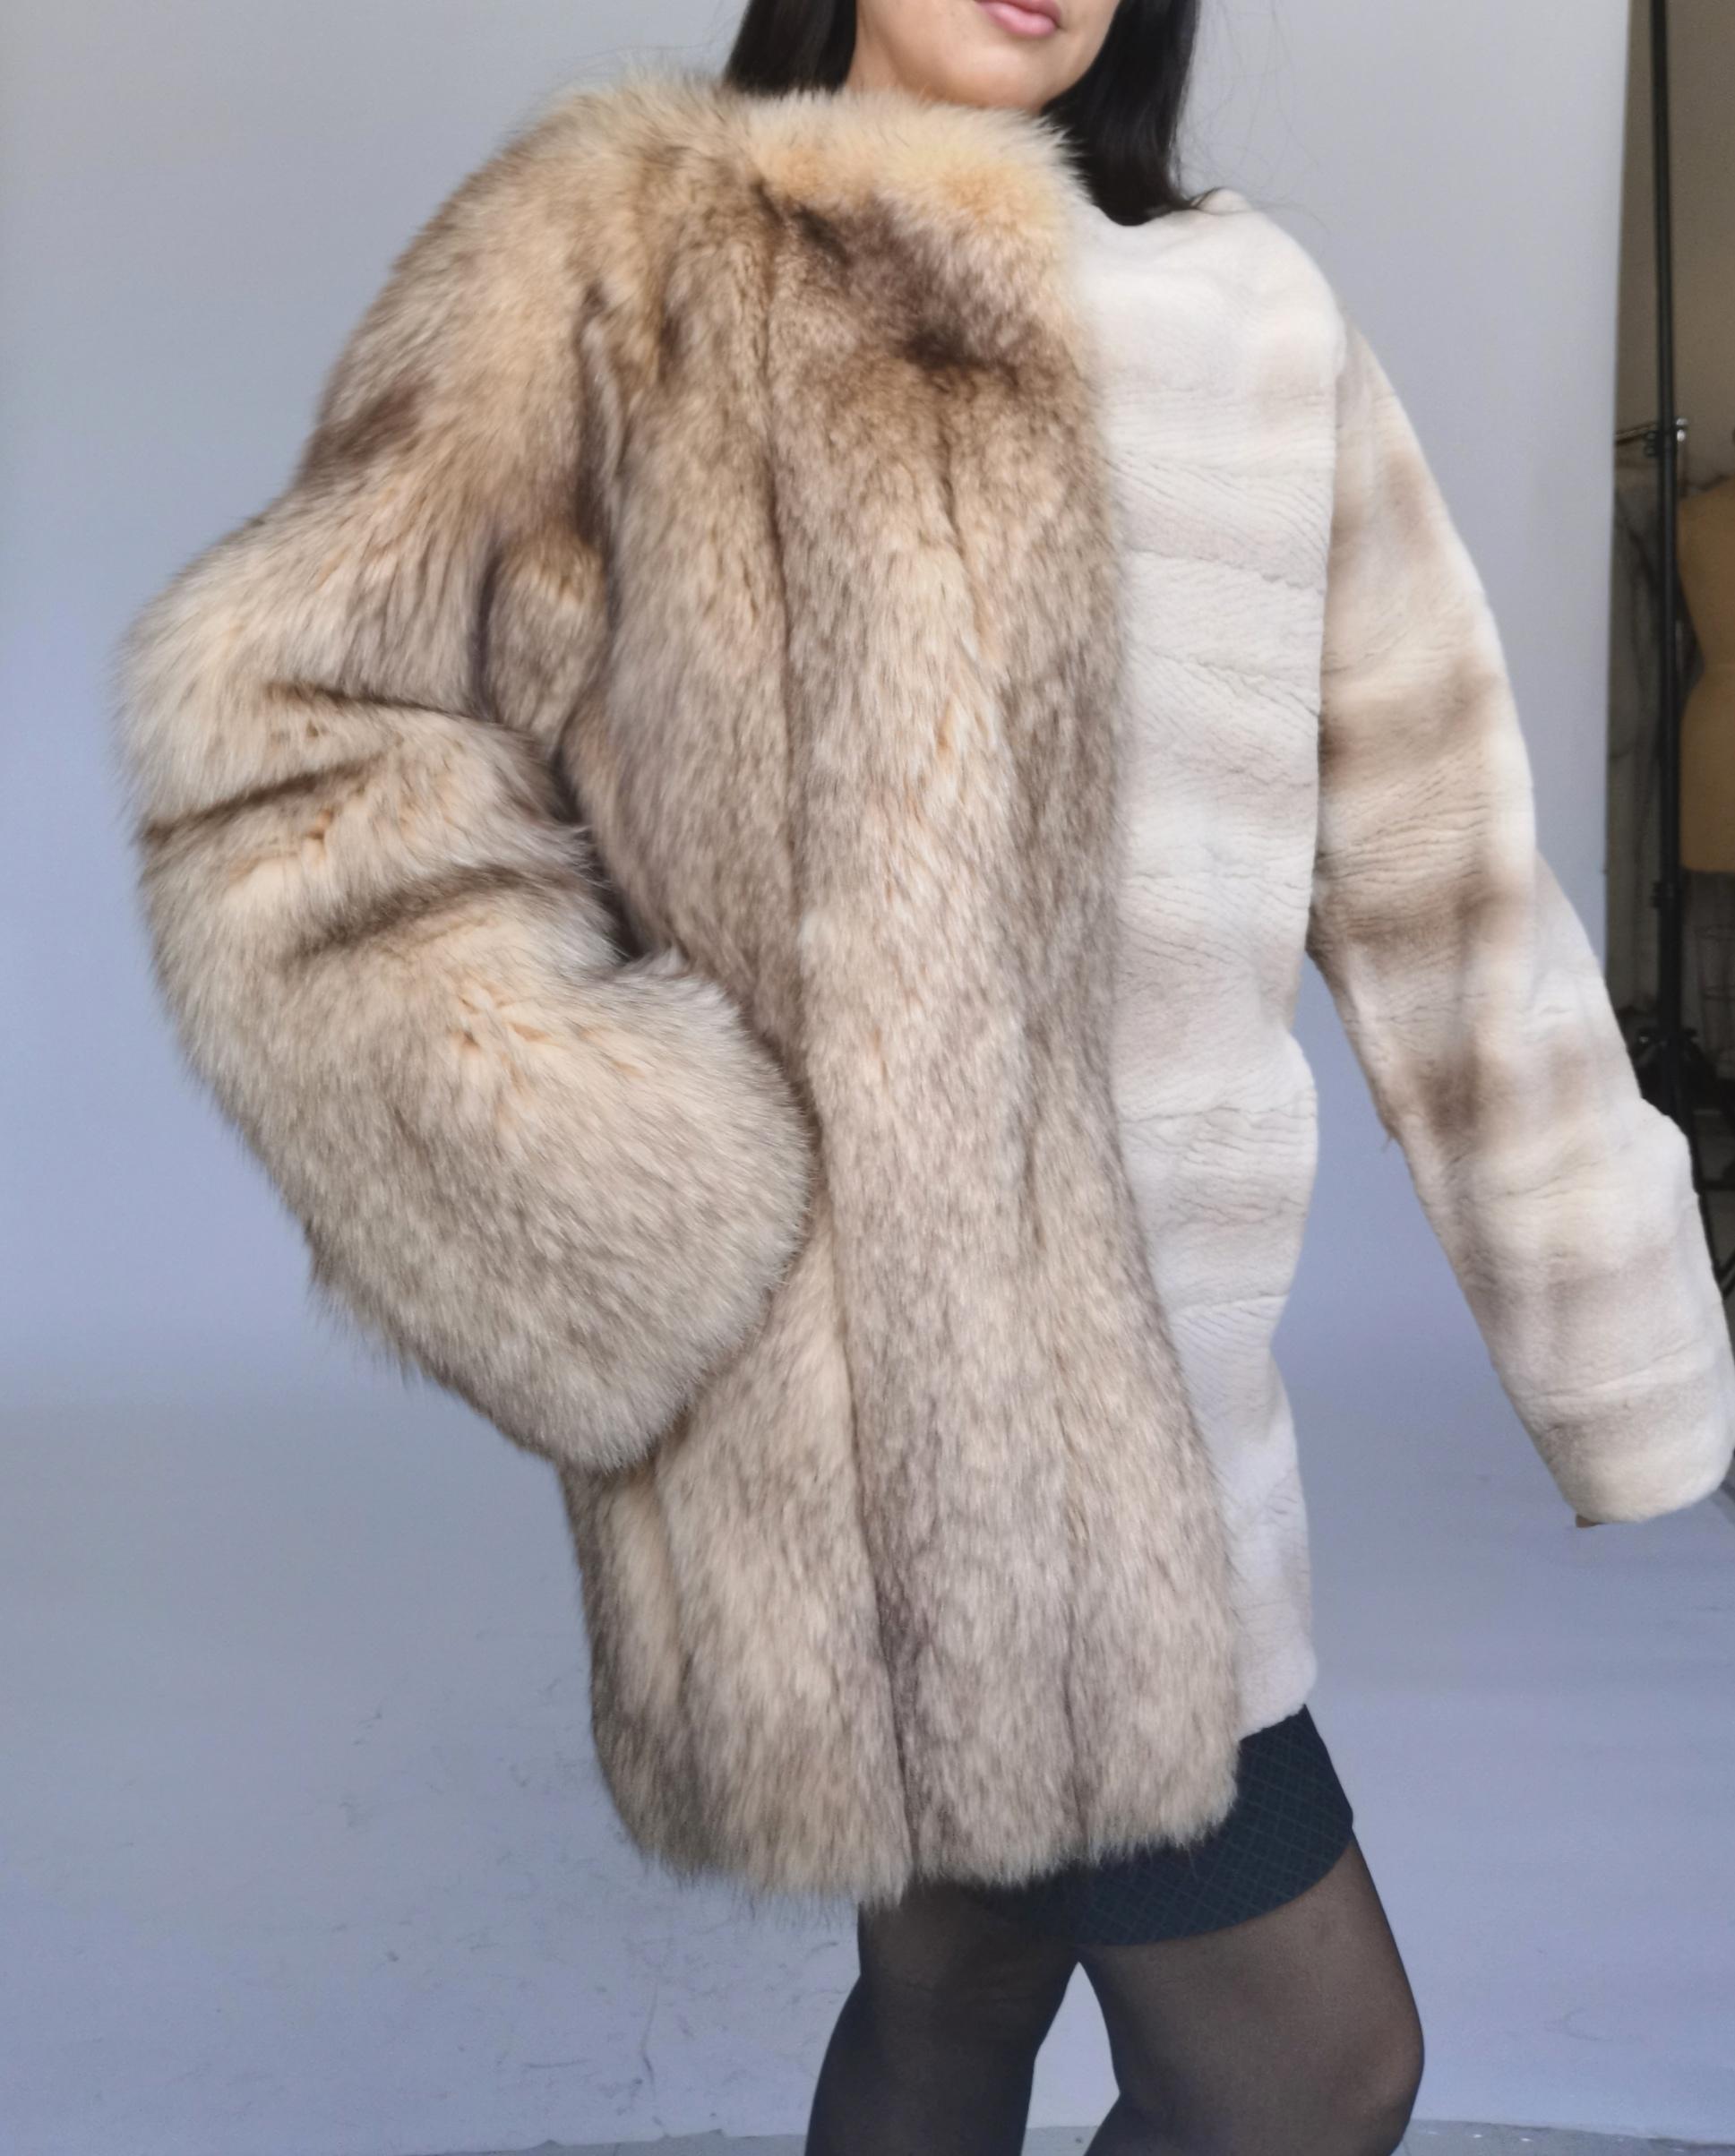 Brand New Birger Christensen Sheared Mink and Fox Fur Sweater coat  (Size 10 -M)

Original design with half vertical pastel whisky fox fur panels and other half with horizontal sheared blush color sheared mink. The mid length sweater coat has a